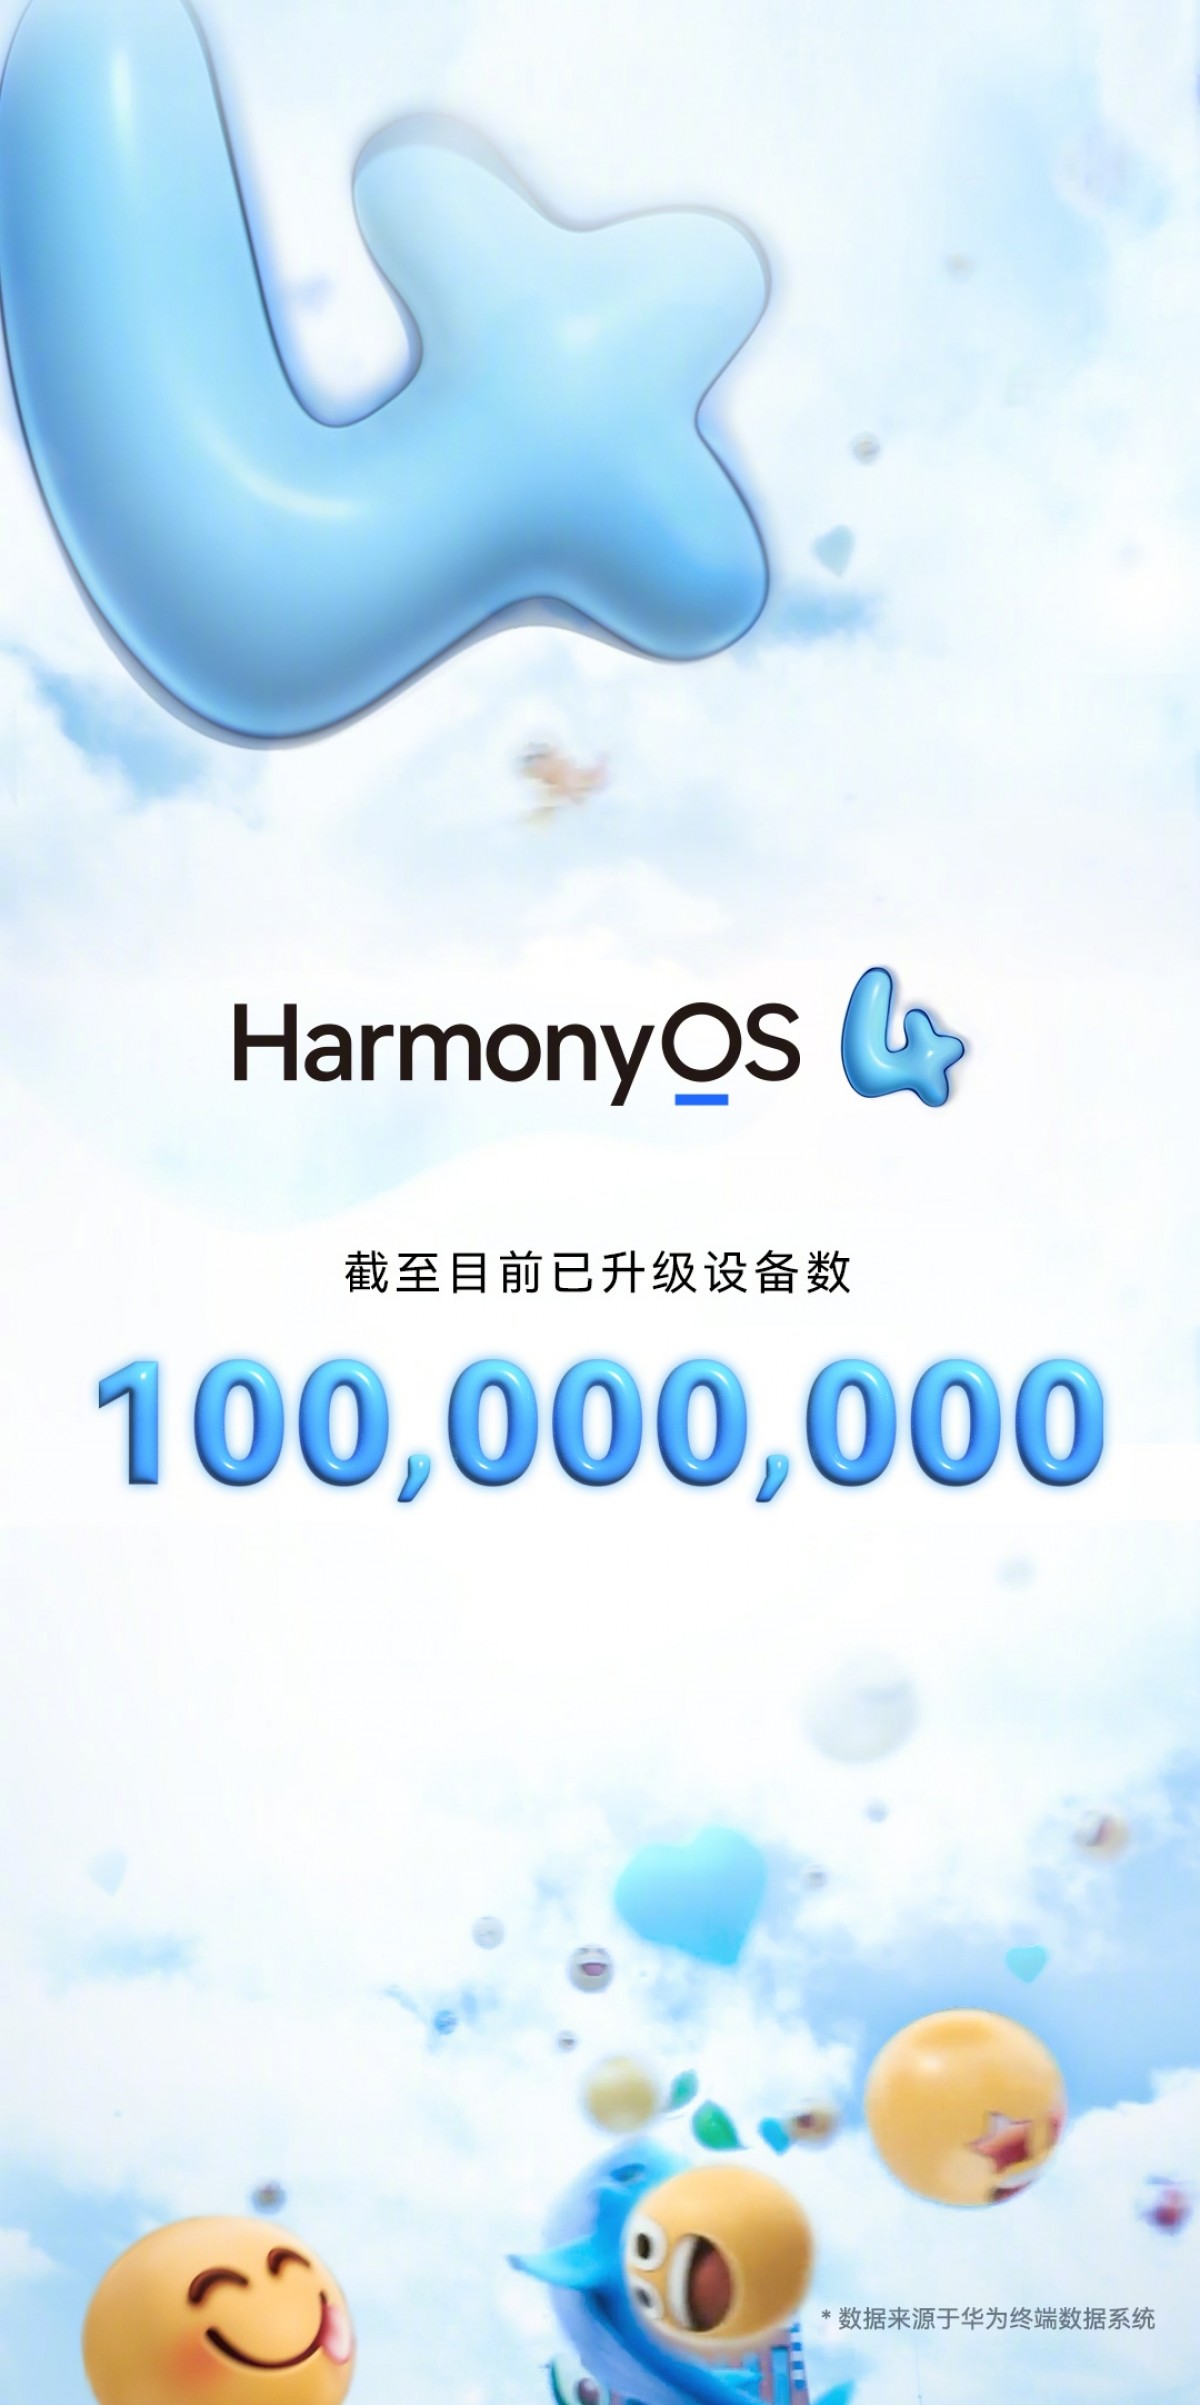 Huawei 100 million HarmonyOS 4 devices mark completed